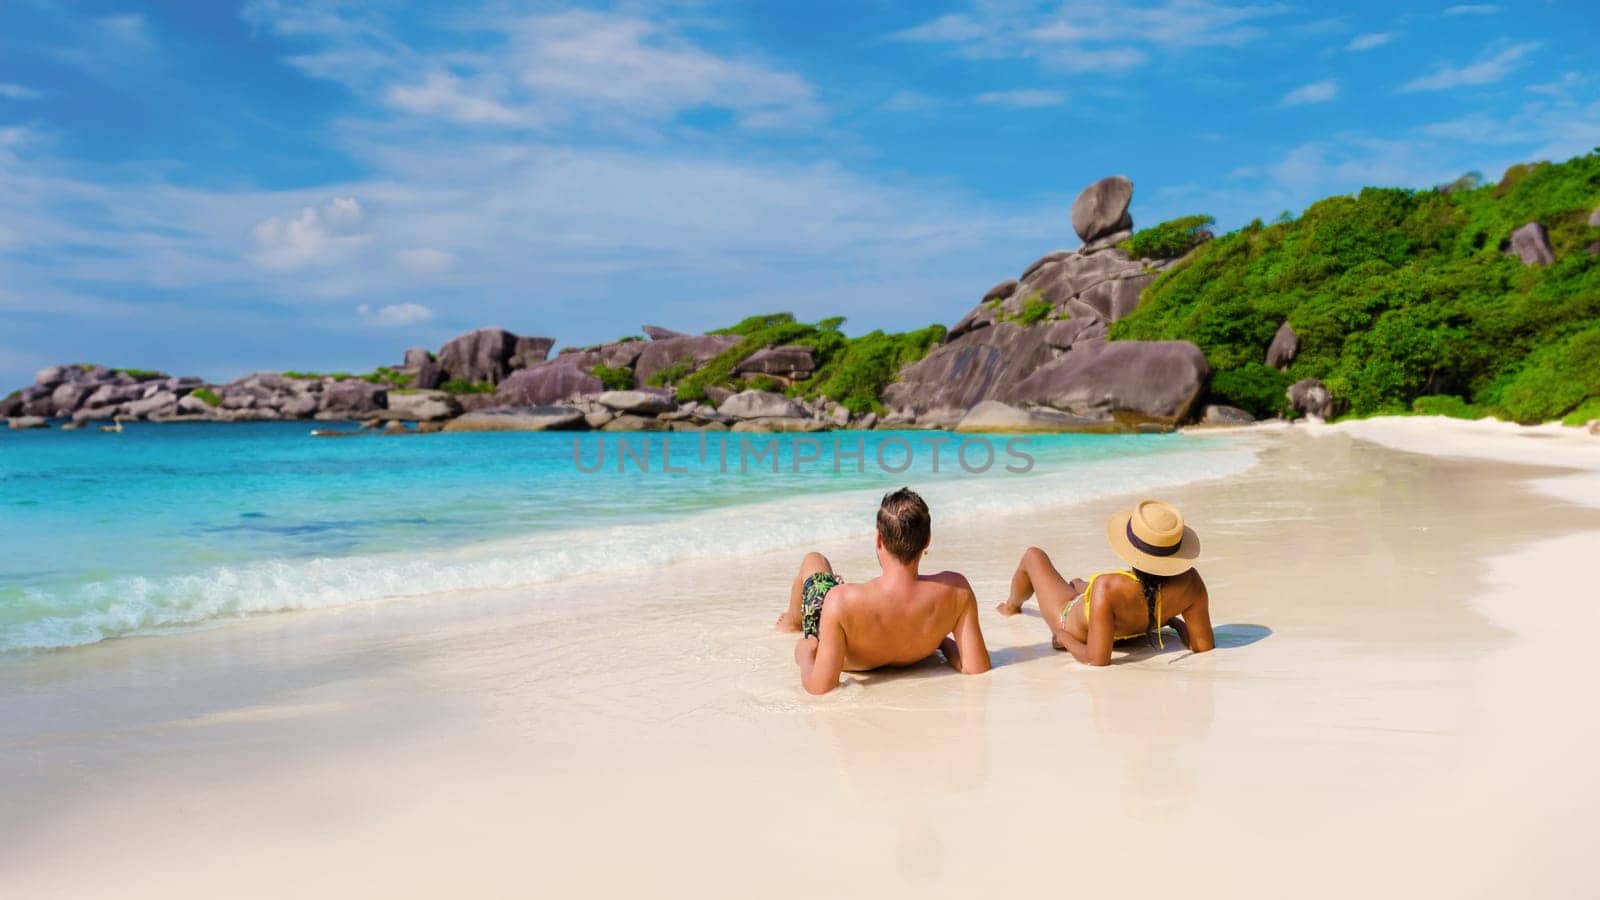 A couple of Asian women and white men relaxing on the beach in the sun at the Similan Islands in Thailand Phannga. couple visit the Similan Islands on a boat trip during vacation